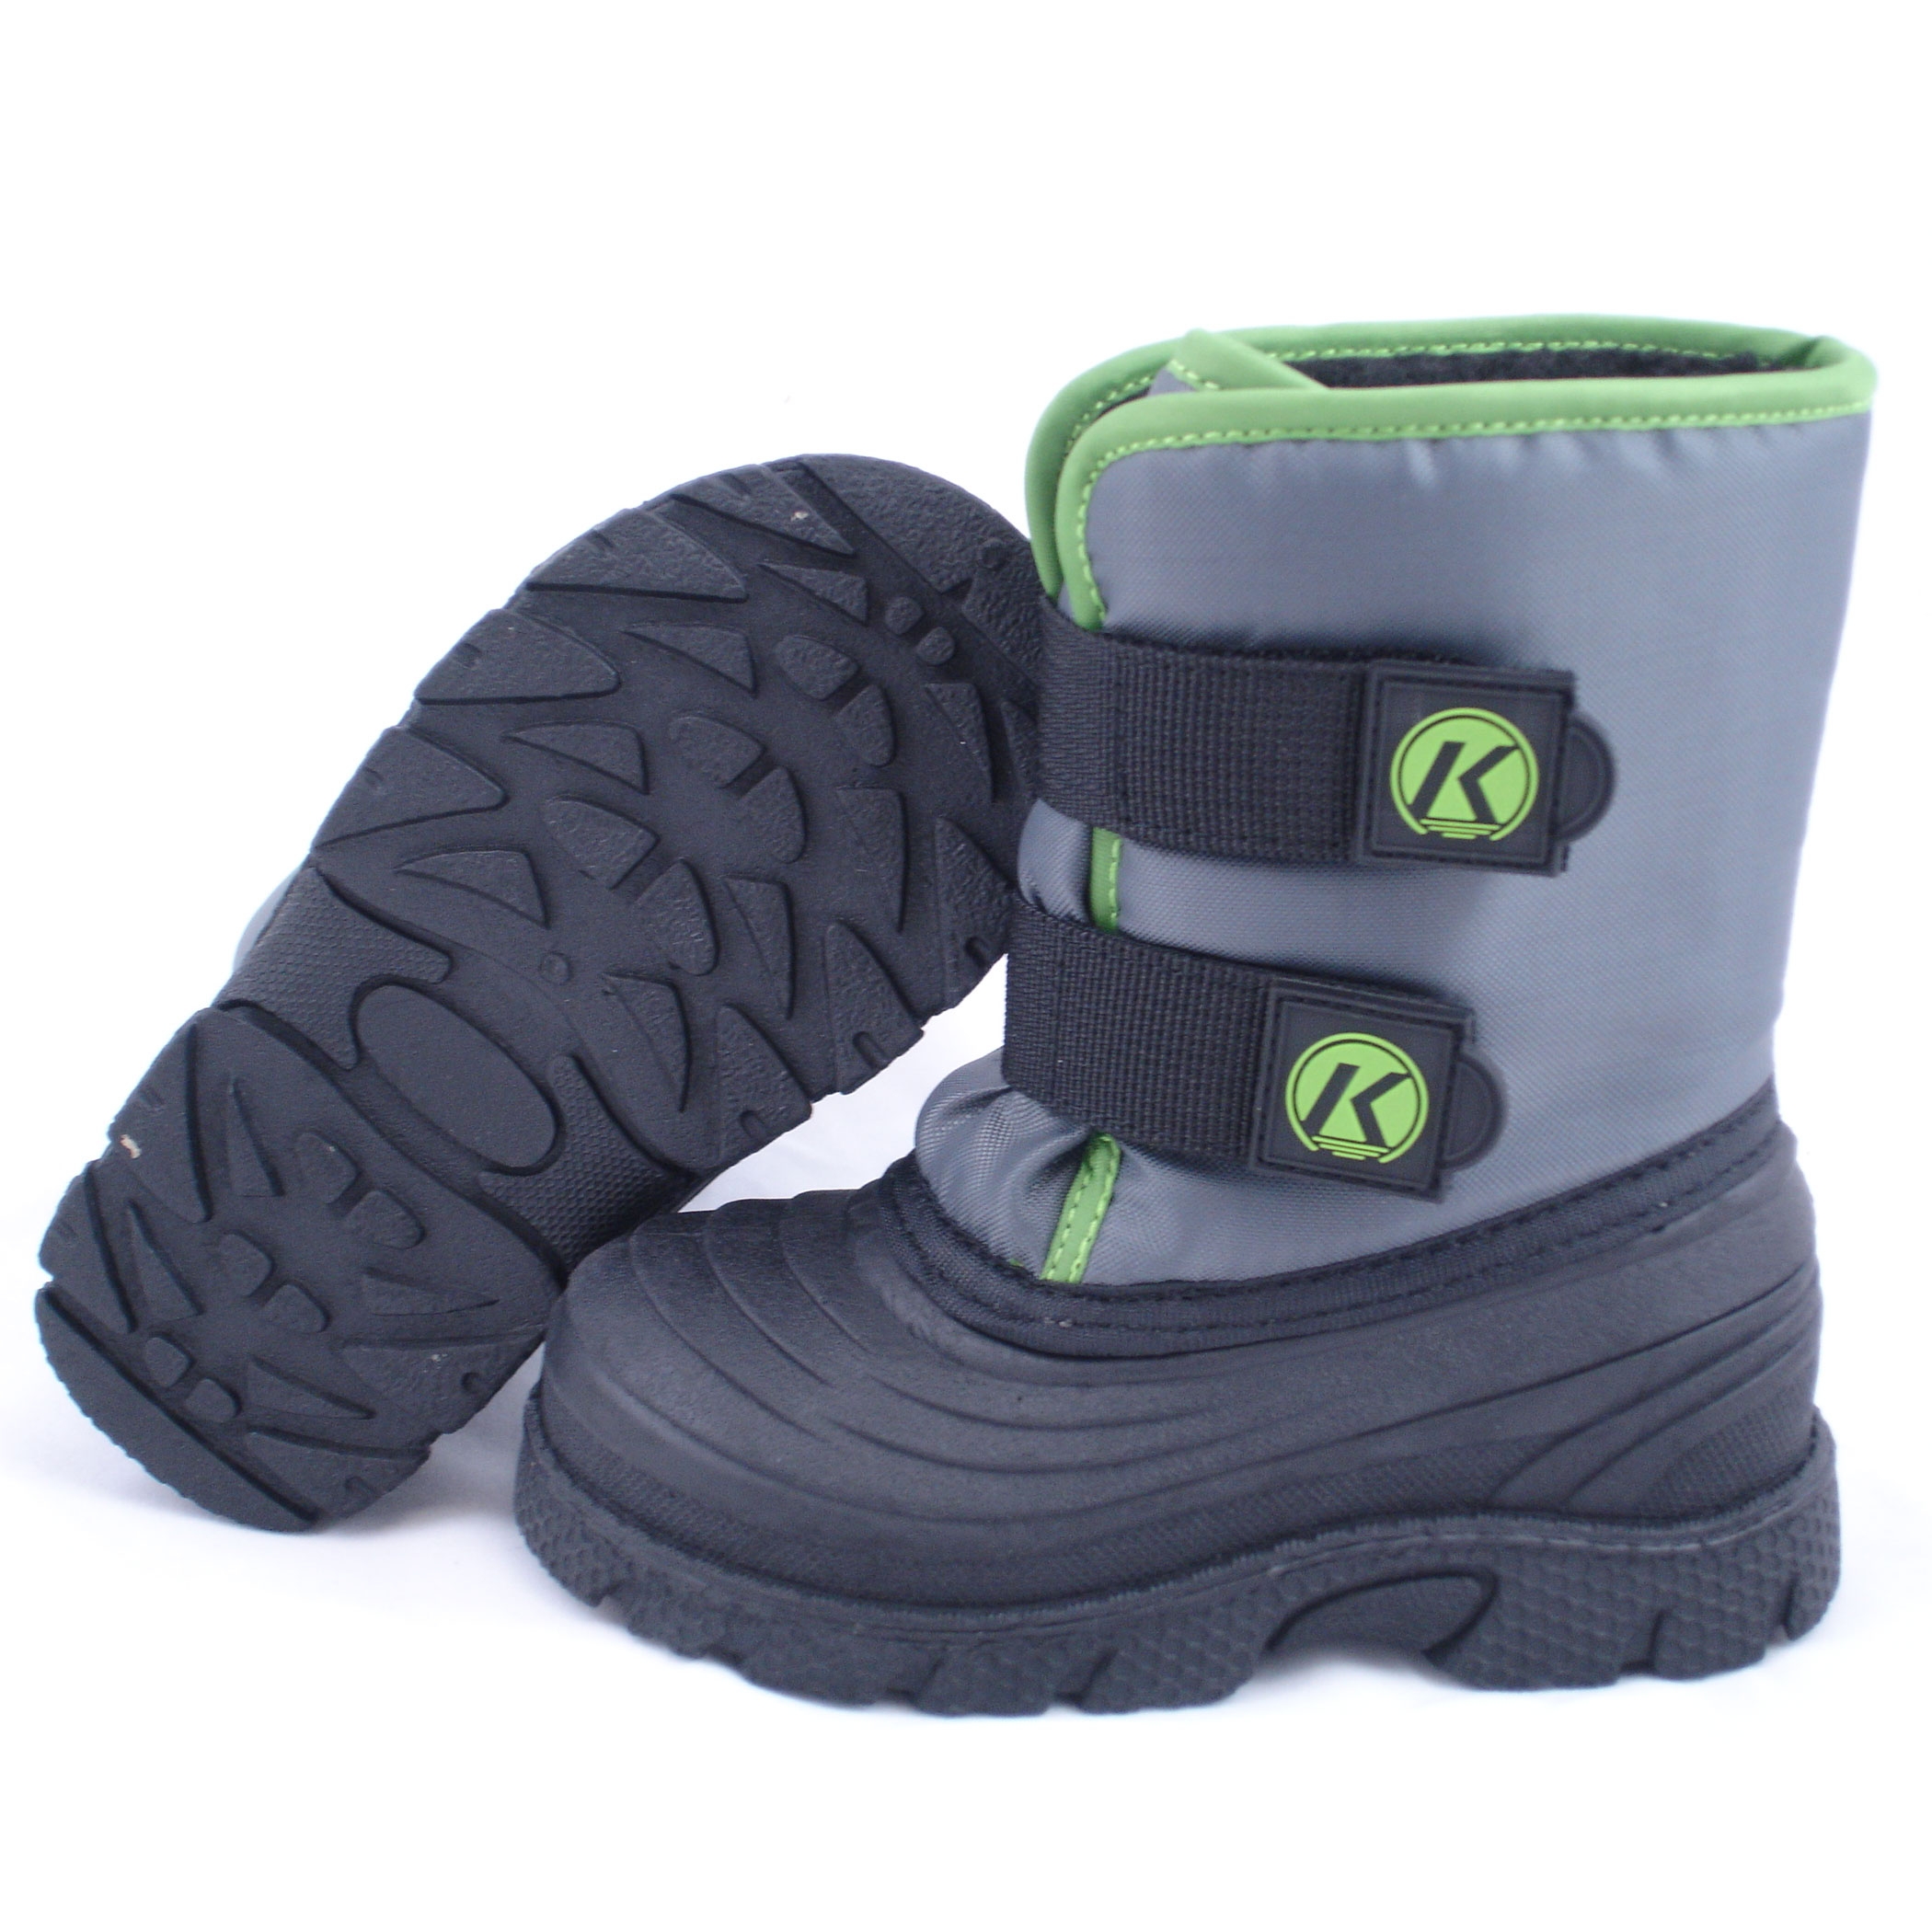 Free Snow Boots Cliparts, Download Free Clip Art, Free Clip.